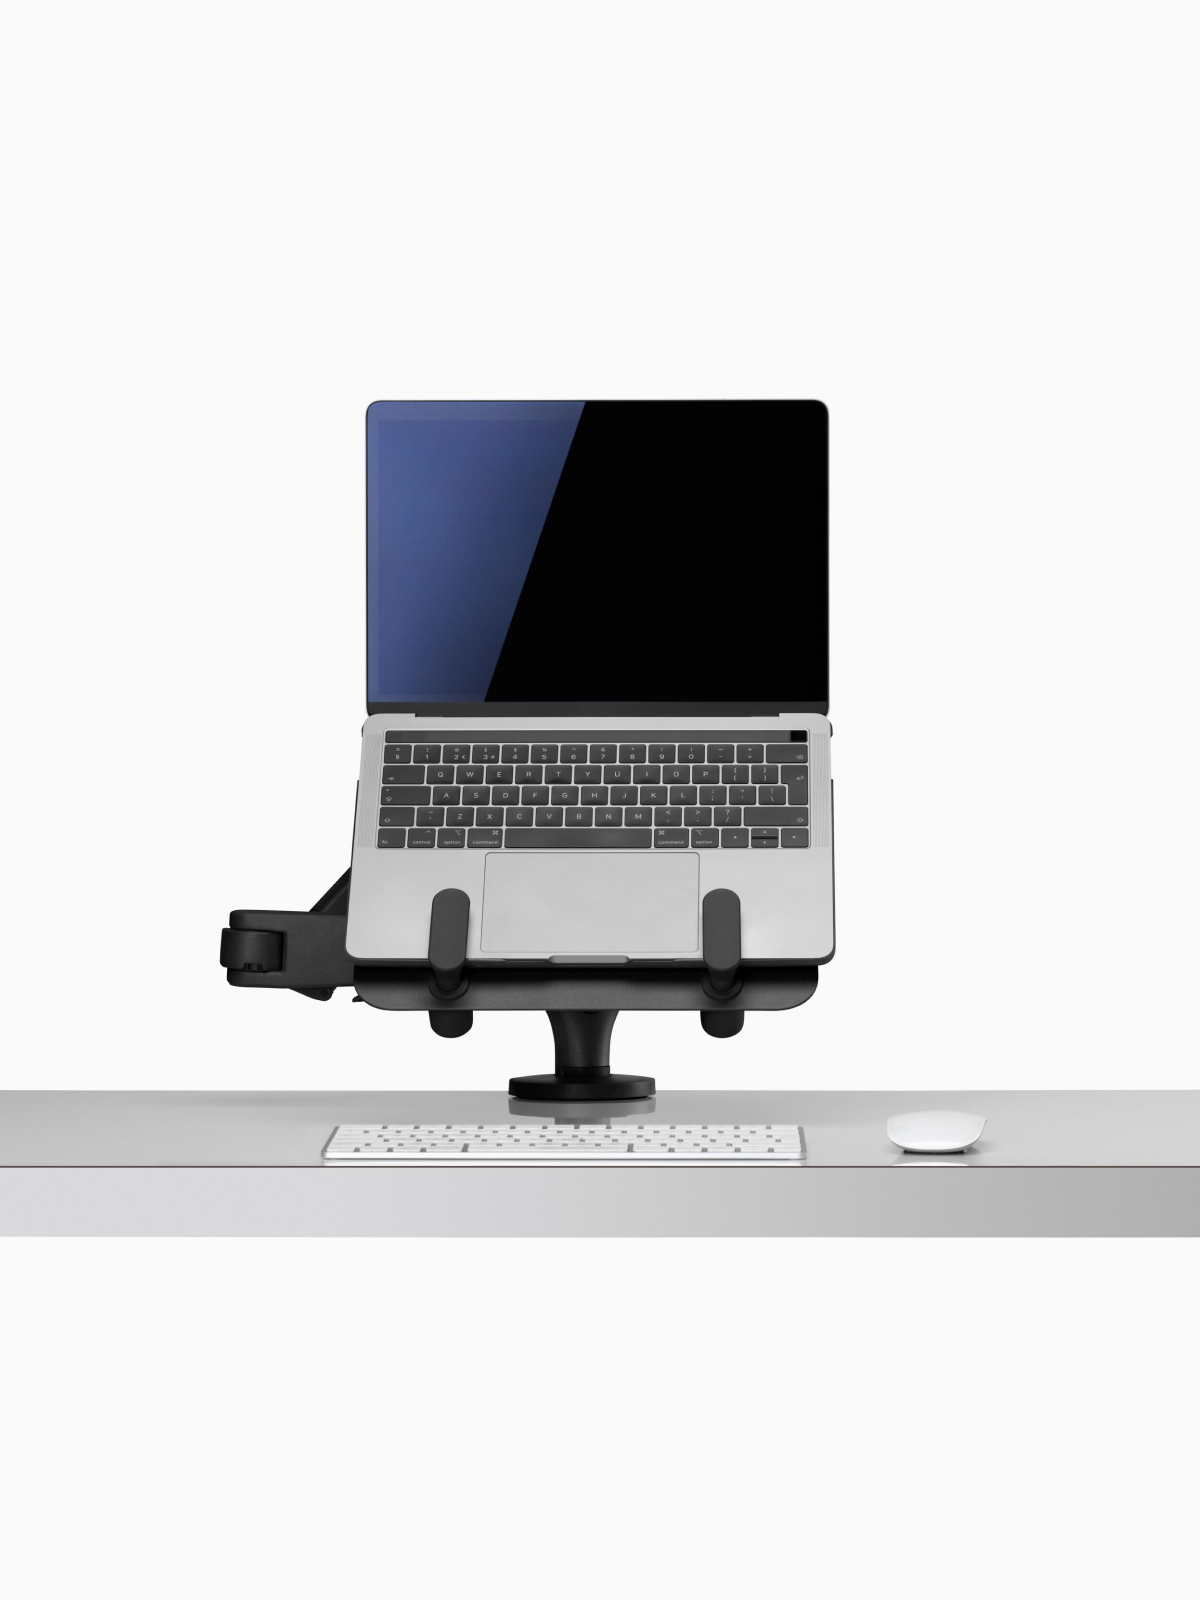 Ollin Laptop and Tablet Mount